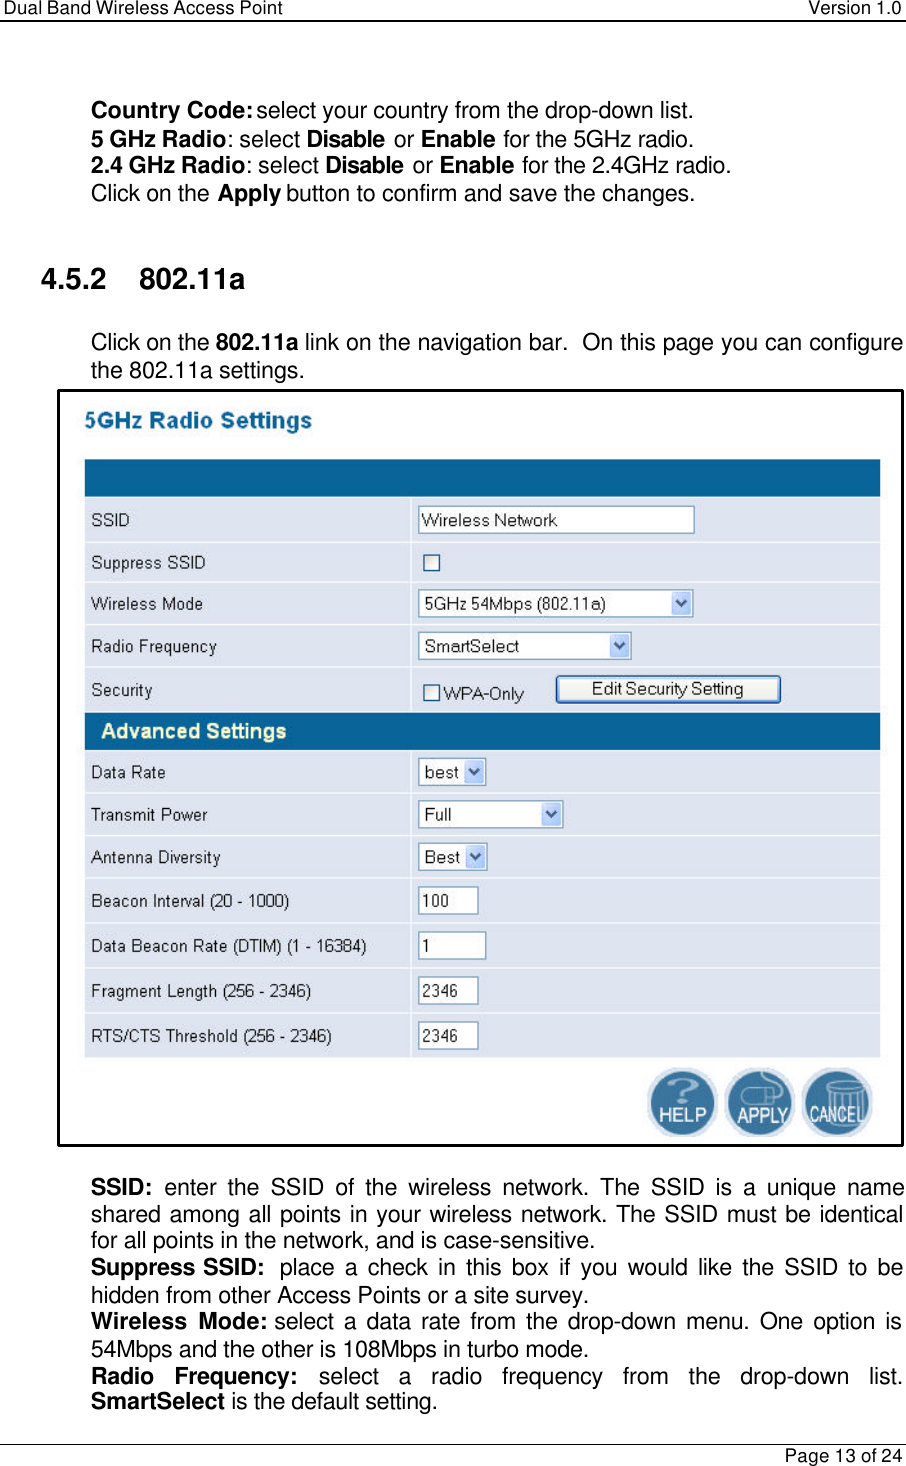 Dual Band Wireless Access Point Version 1.0Page 13 of 24 Country Code: select your country from the drop-down list. 5 GHz Radio: select Disable or Enable for the 5GHz radio. 2.4 GHz Radio: select Disable or Enable for the 2.4GHz radio. Click on the Apply button to confirm and save the changes.4.5.2    802.11a Click on the 802.11a link on the navigation bar.  On this page you can configurethe 802.11a settings. SSID:  enter the SSID of the wireless network. The SSID is a unique nameshared among all points in your wireless network. The SSID must be identicalfor all points in the network, and is case-sensitive. Suppress SSID:  place a check in this box if you would like the SSID to behidden from other Access Points or a site survey. Wireless Mode: select a data rate from the drop-down menu. One option is54Mbps and the other is 108Mbps in turbo mode. Radio Frequency: select a radio frequency from the drop-down list.SmartSelect is the default setting.